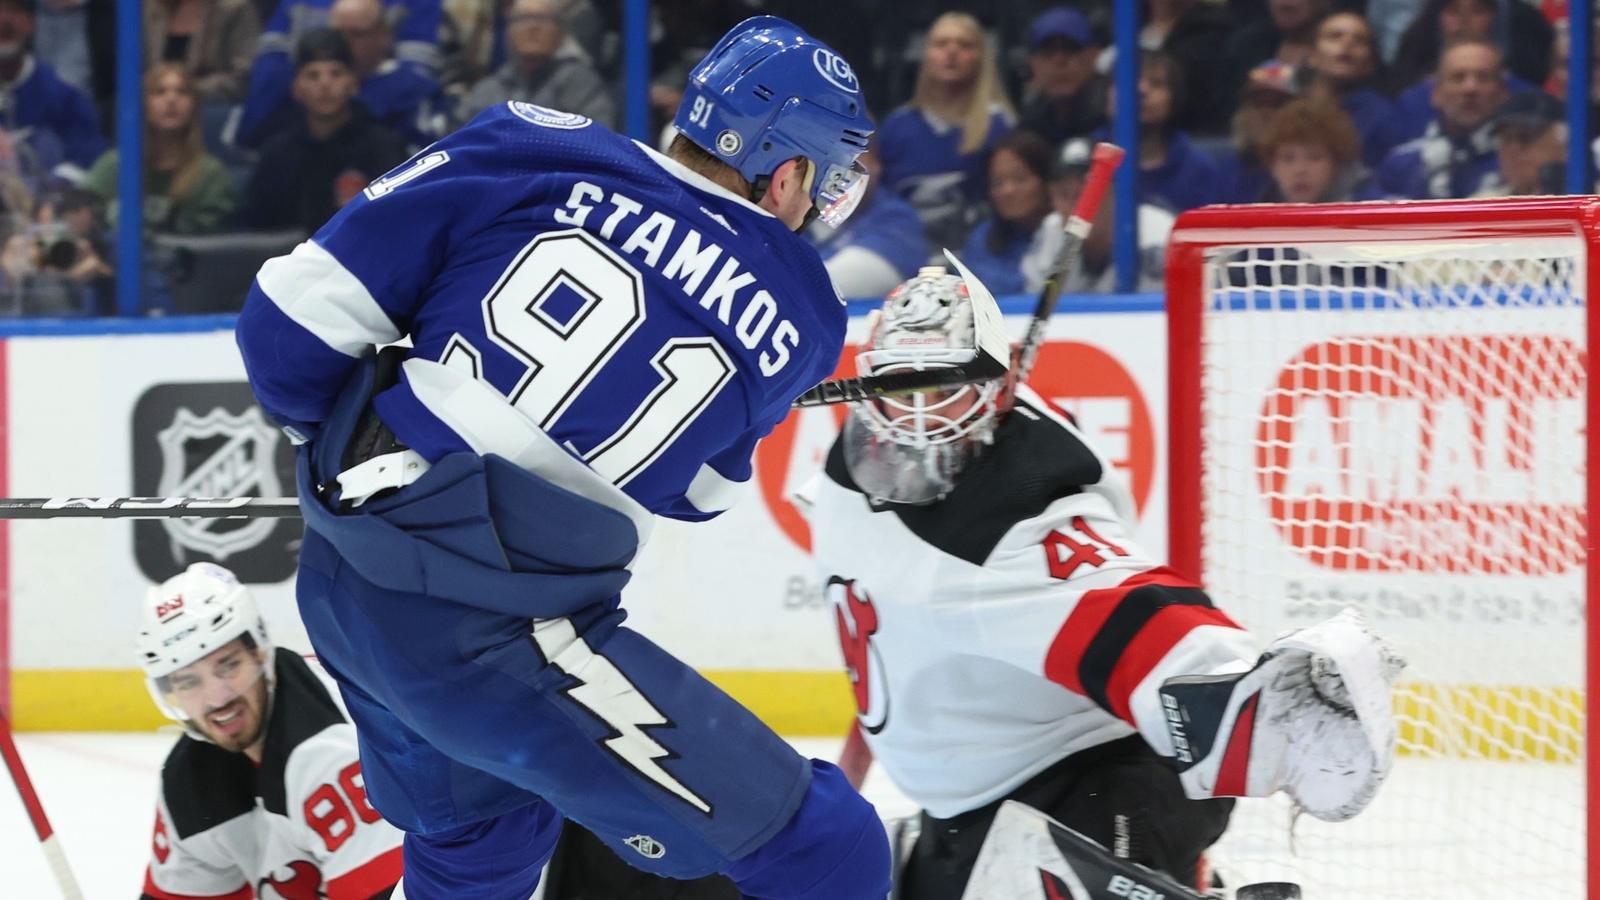 Tampa Bay Lightning center Steven Stamkos (91) shoots the puck as New Jersey Devils goaltender Vitek Vanecek (41) makes a save during the first period at Amalie Arena. / Kim Klement Neitzel-USA TODAY Sports